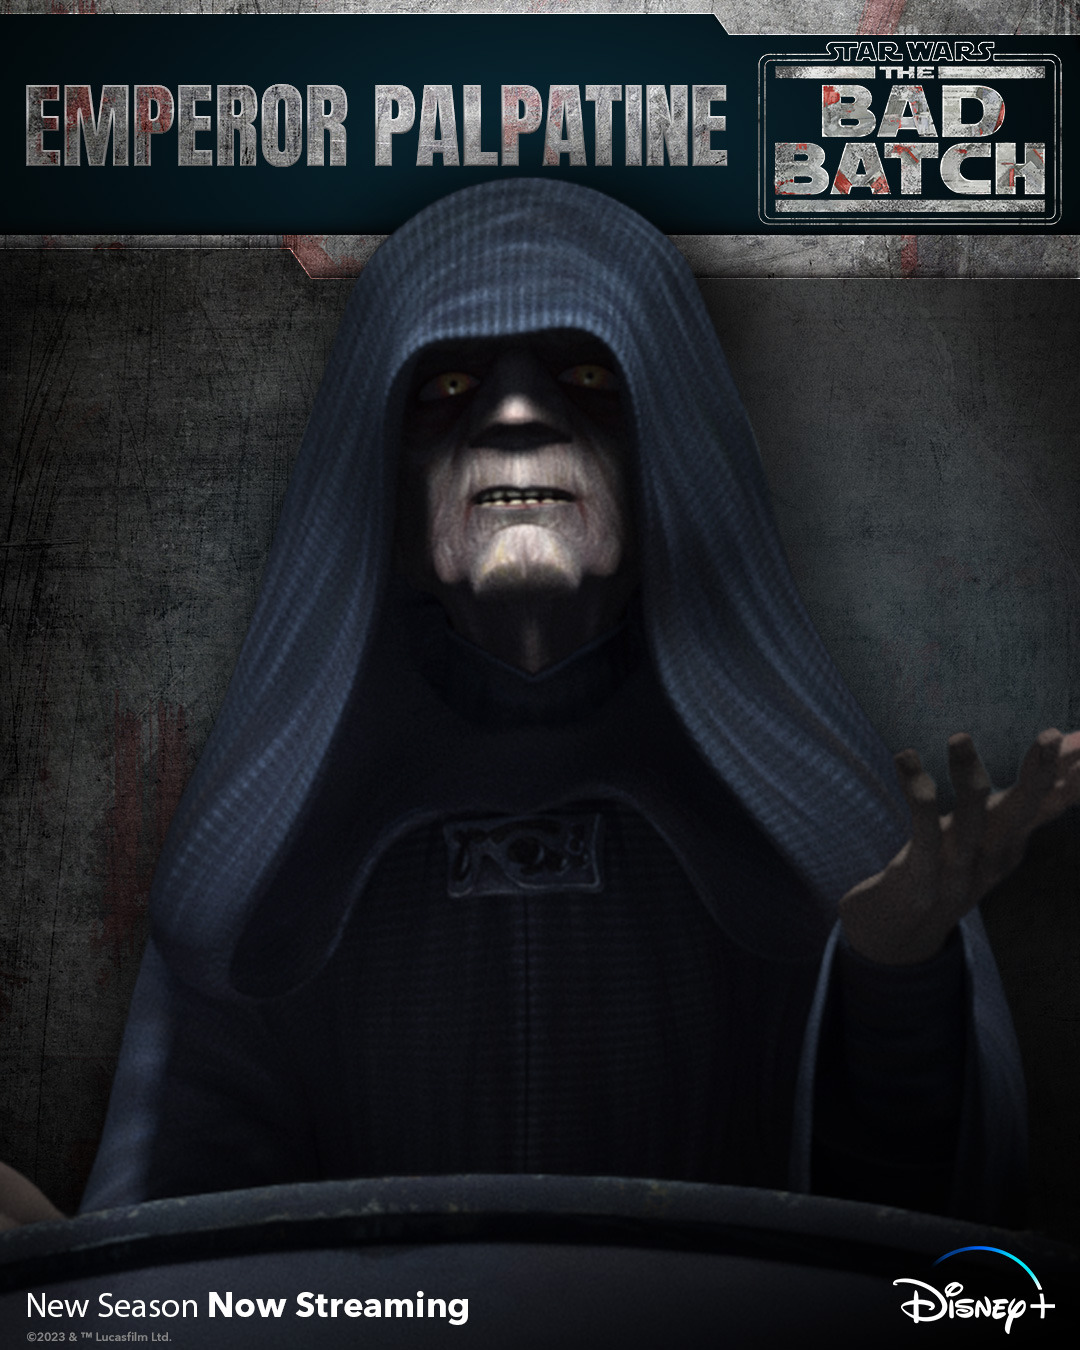 Extra Large TV Poster Image for Star Wars: The Bad Batch (#37 of 60)